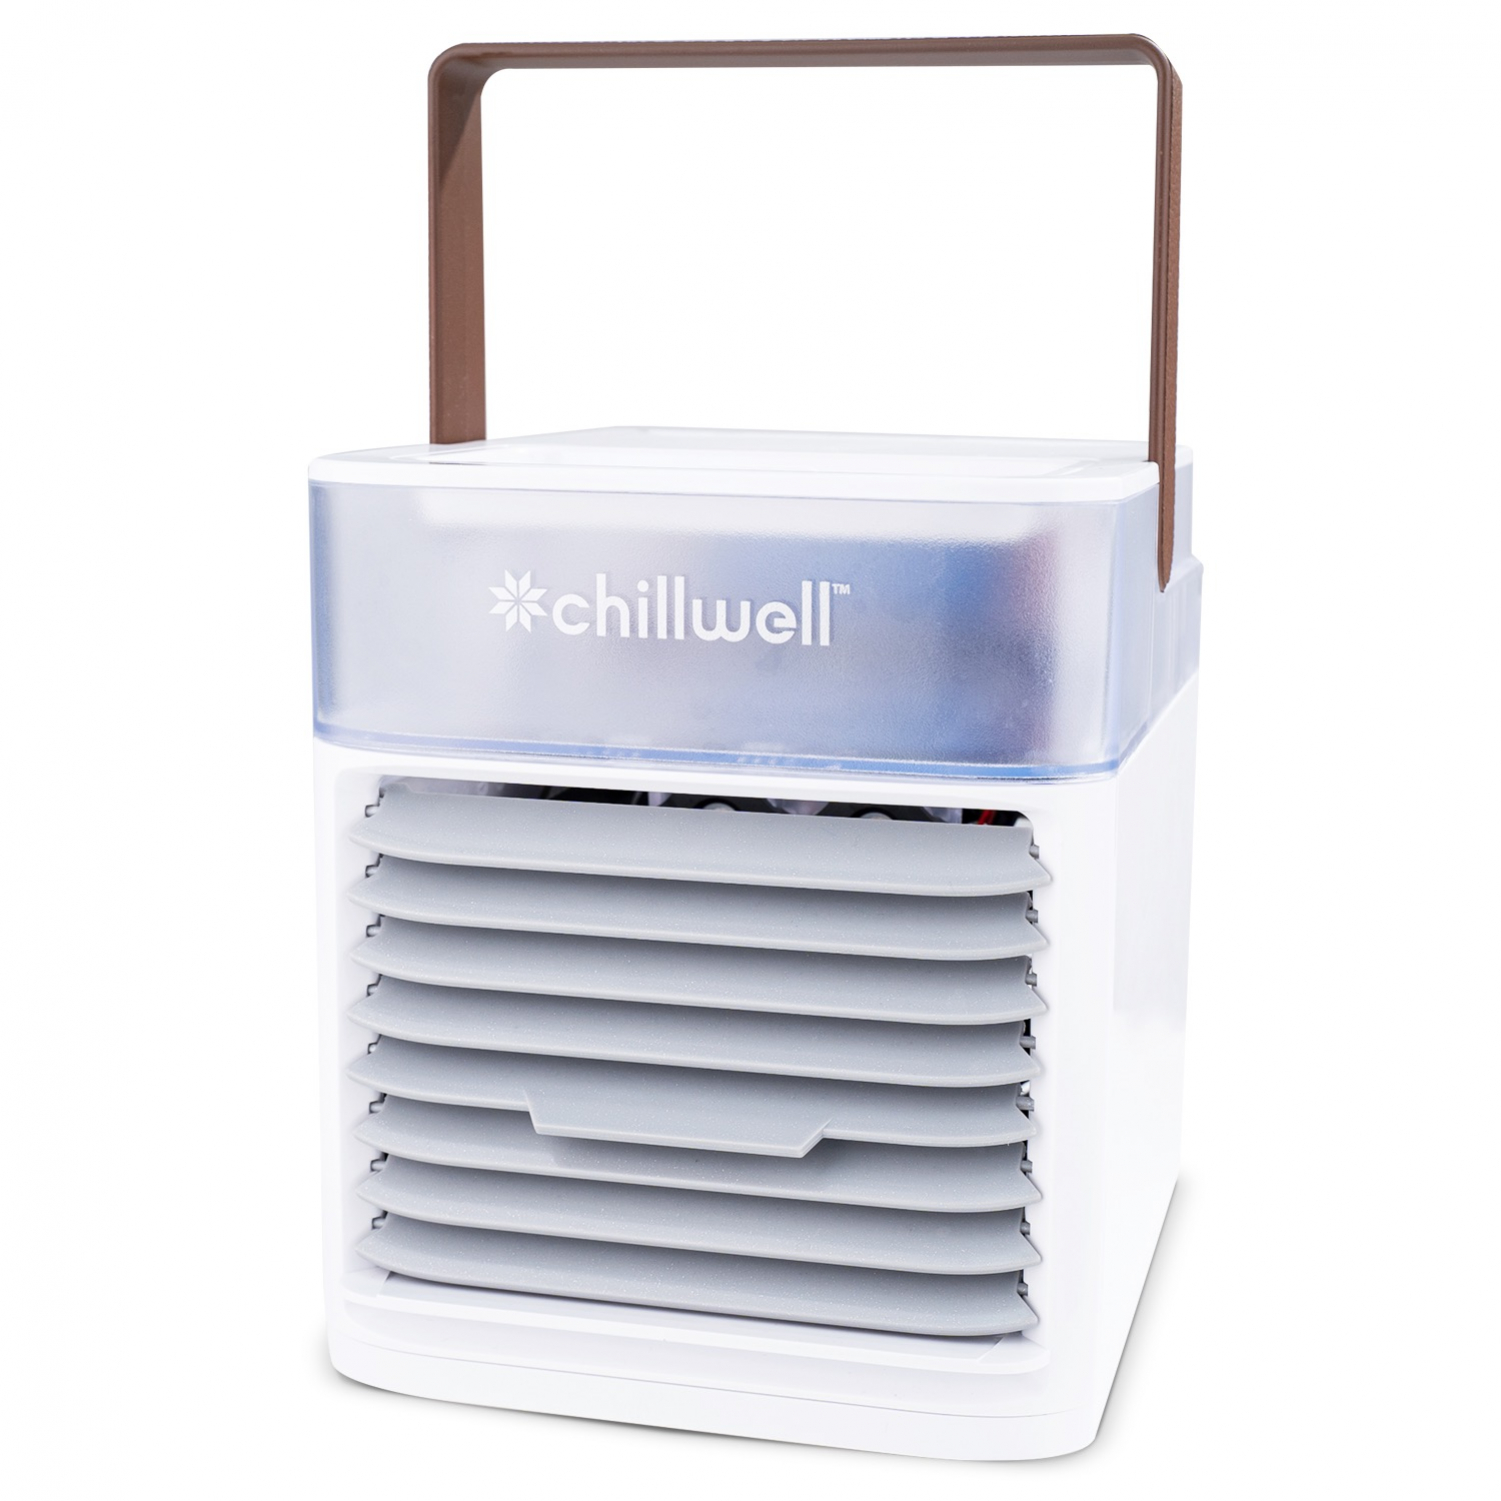 Portable Chillwell AC Cooler Reviews